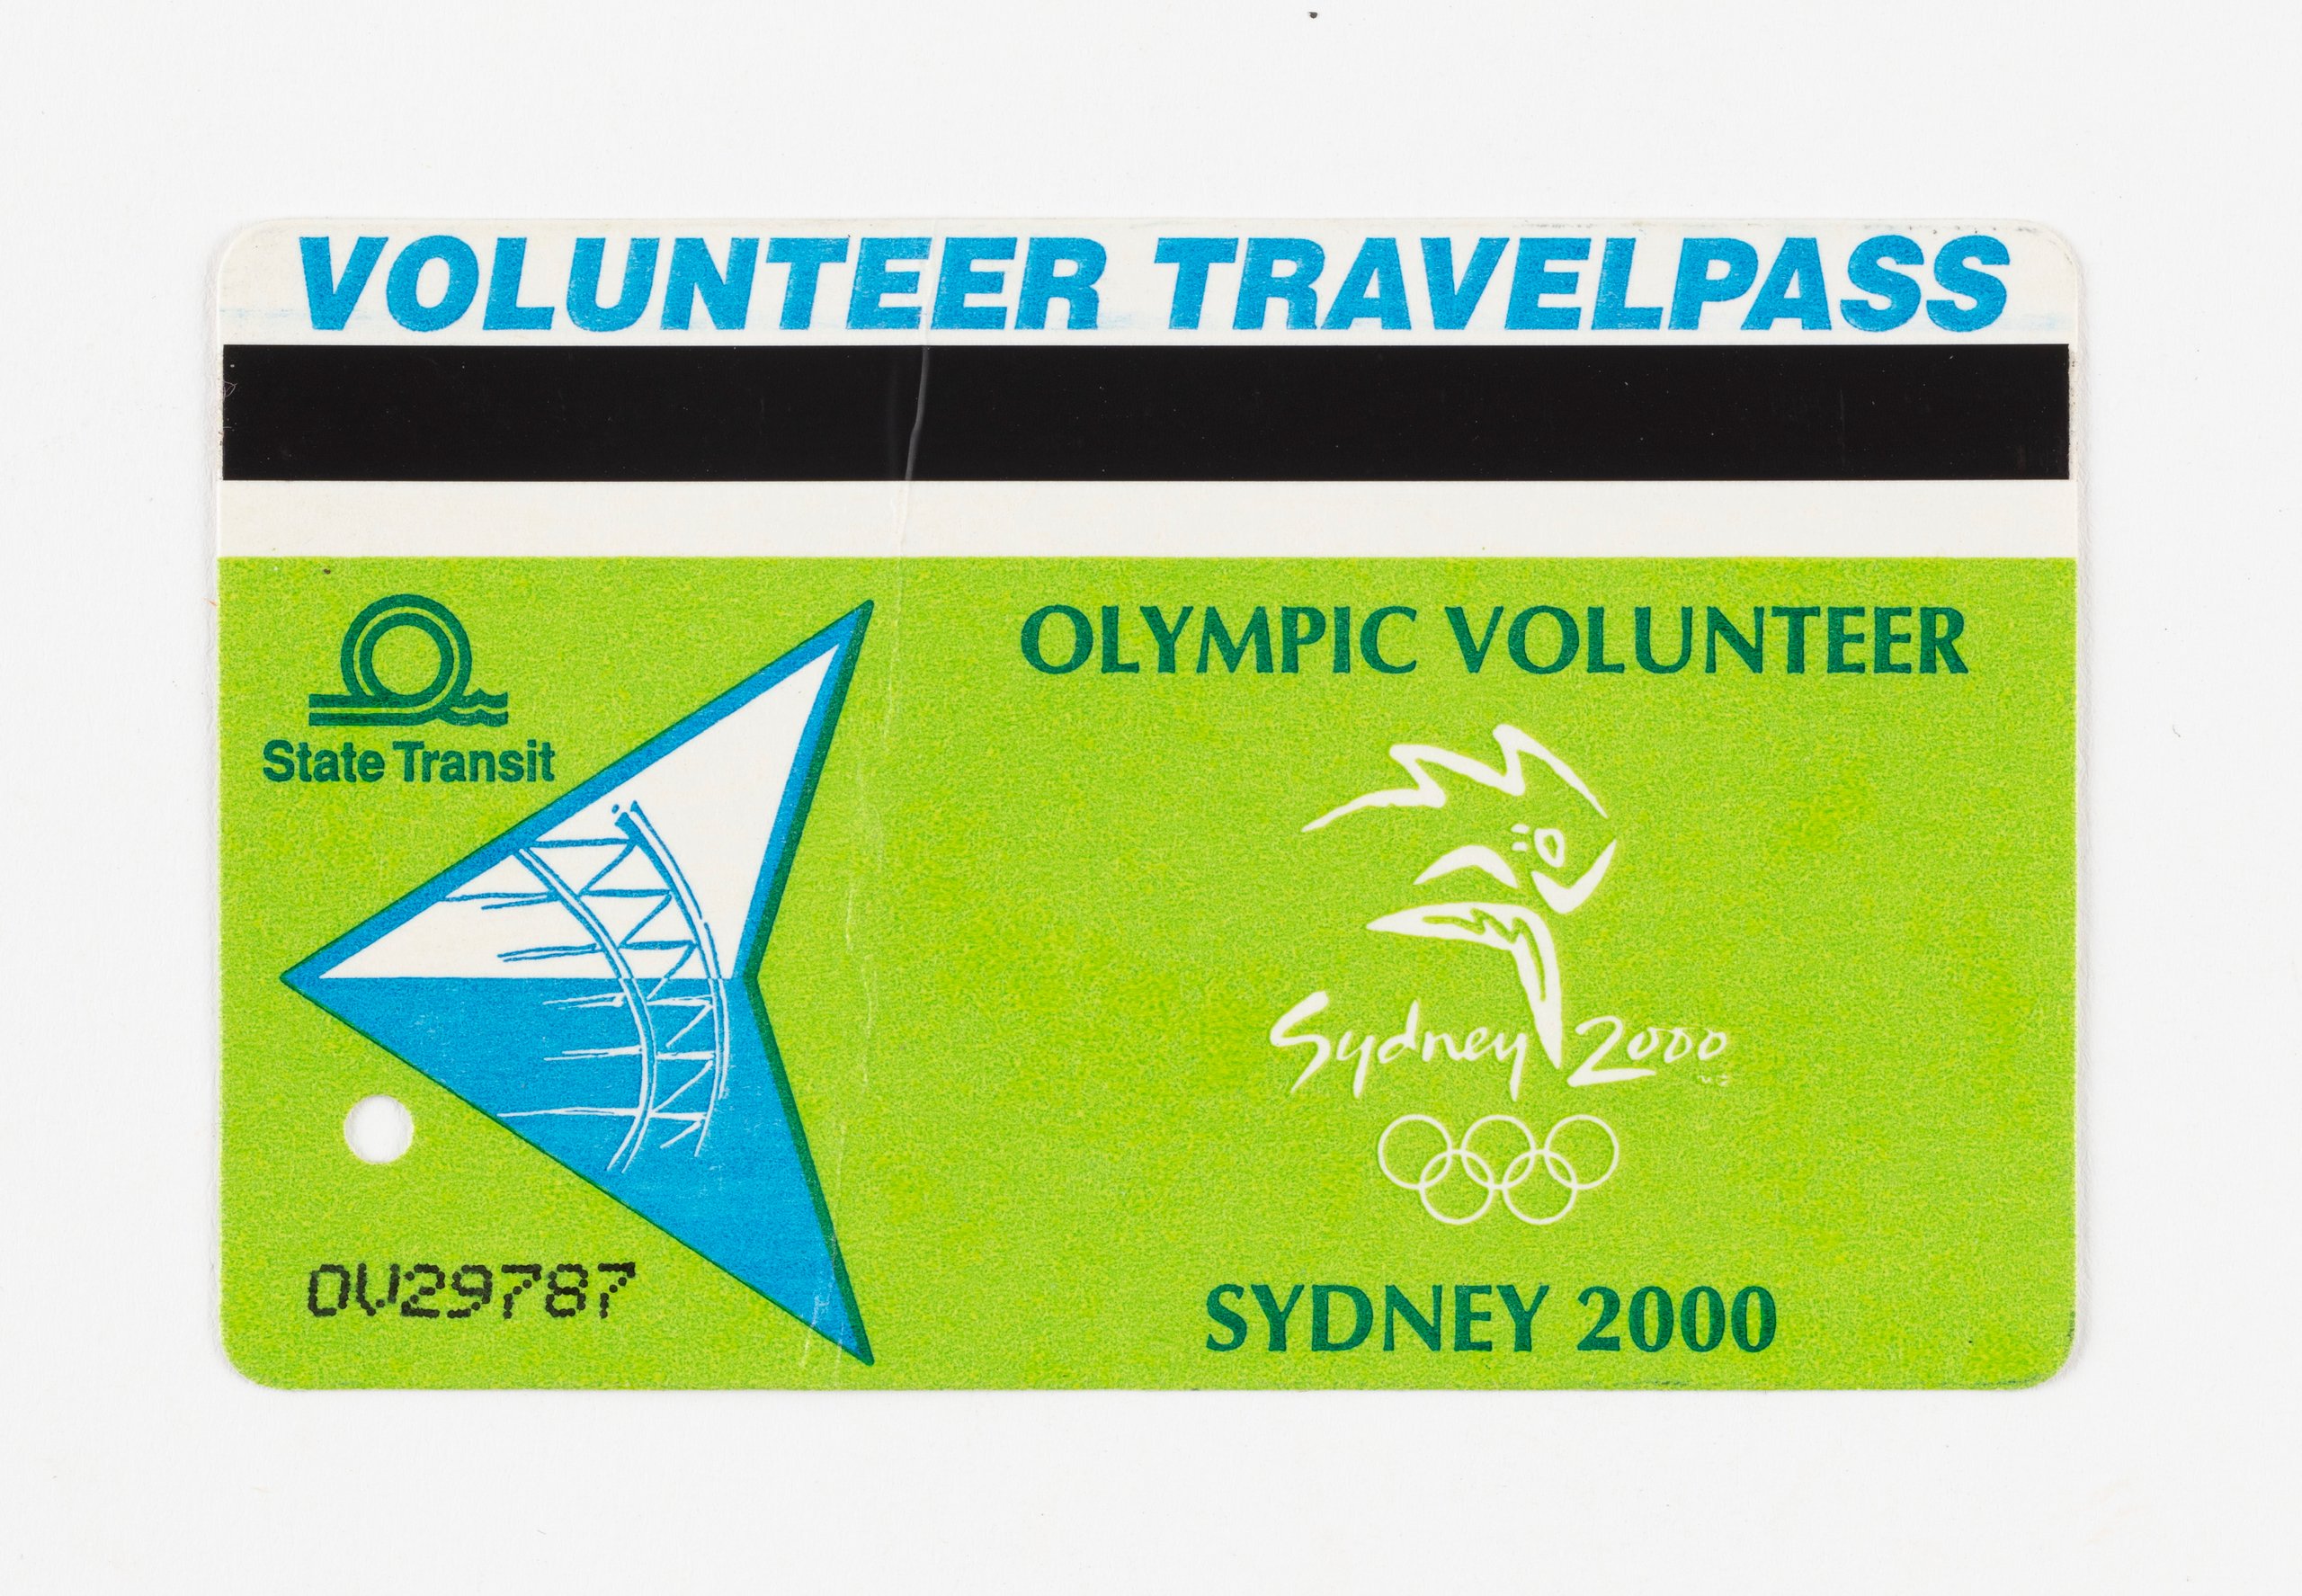 'Volunteer travel pass' from Sydney 2000 Olympic Games